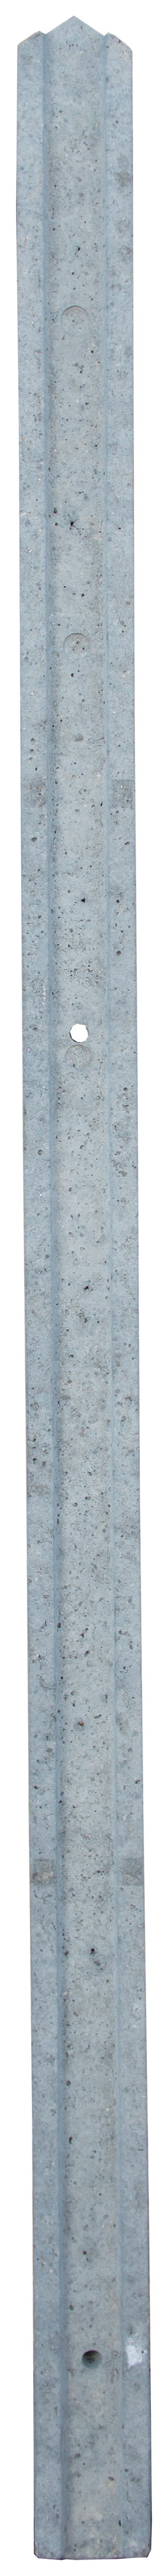 Forest Slotted Lightweight Concrete Post - Pack of 5